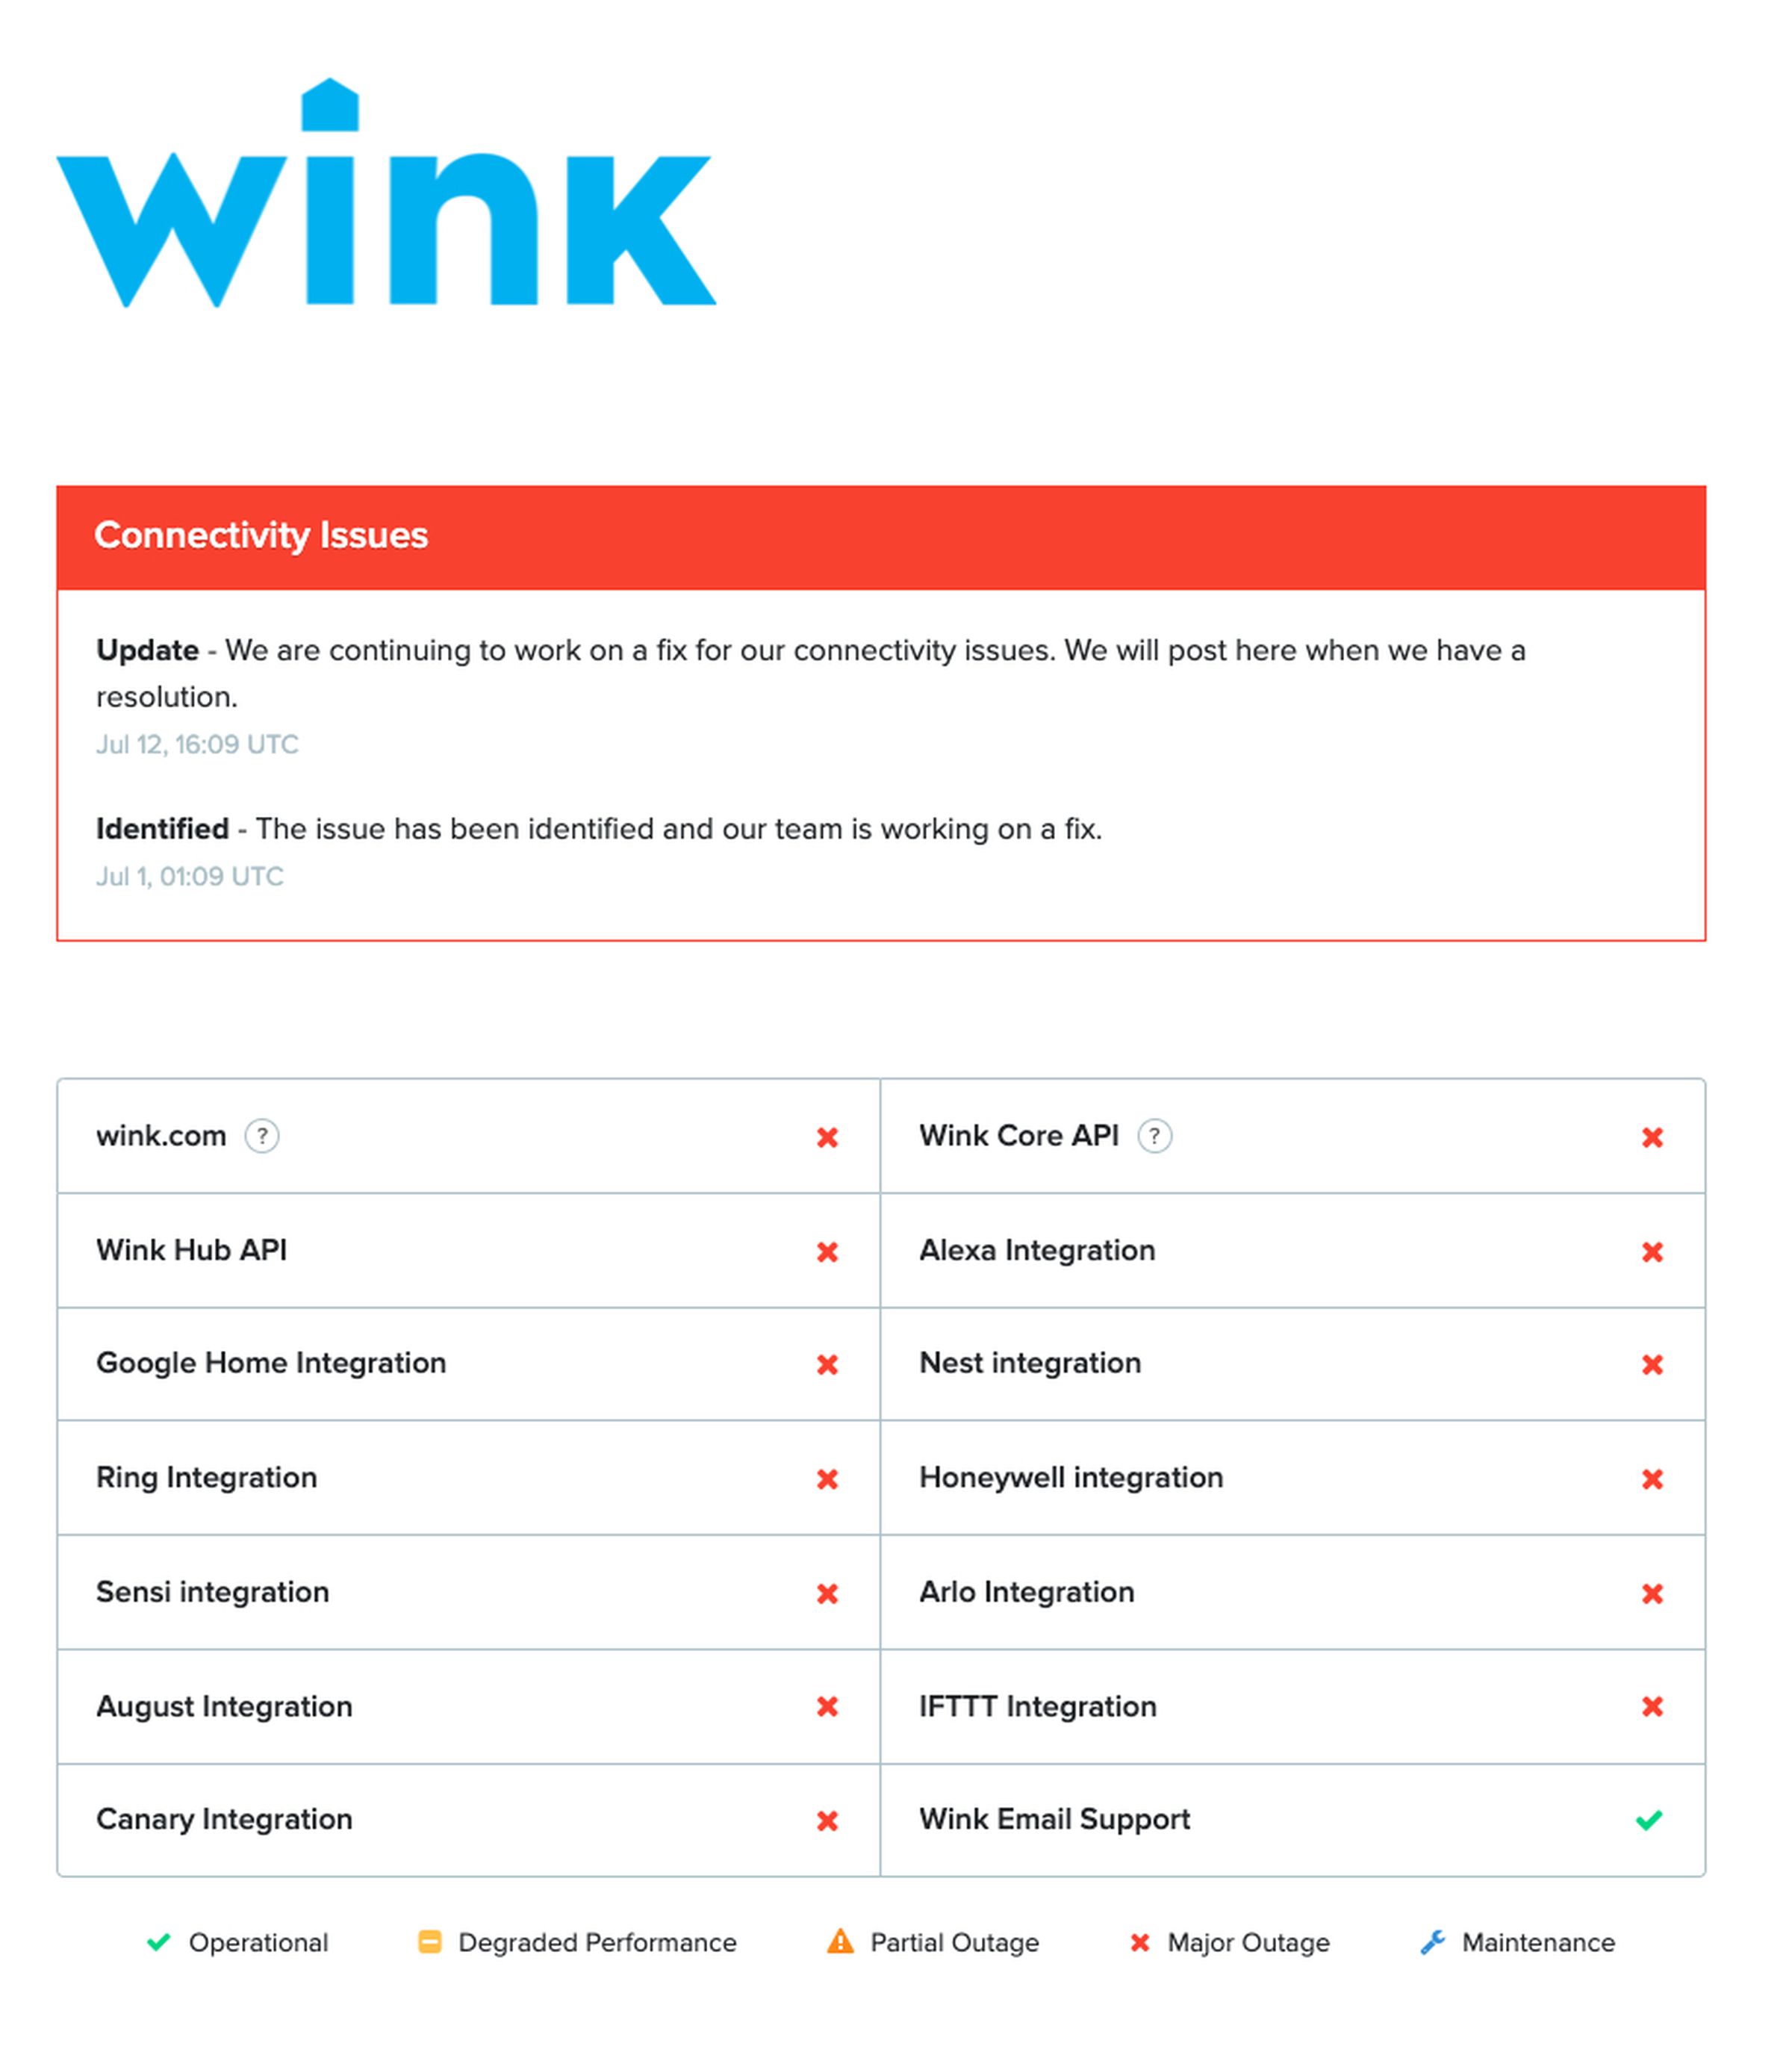 A list of Wink’s services that are currently offline.